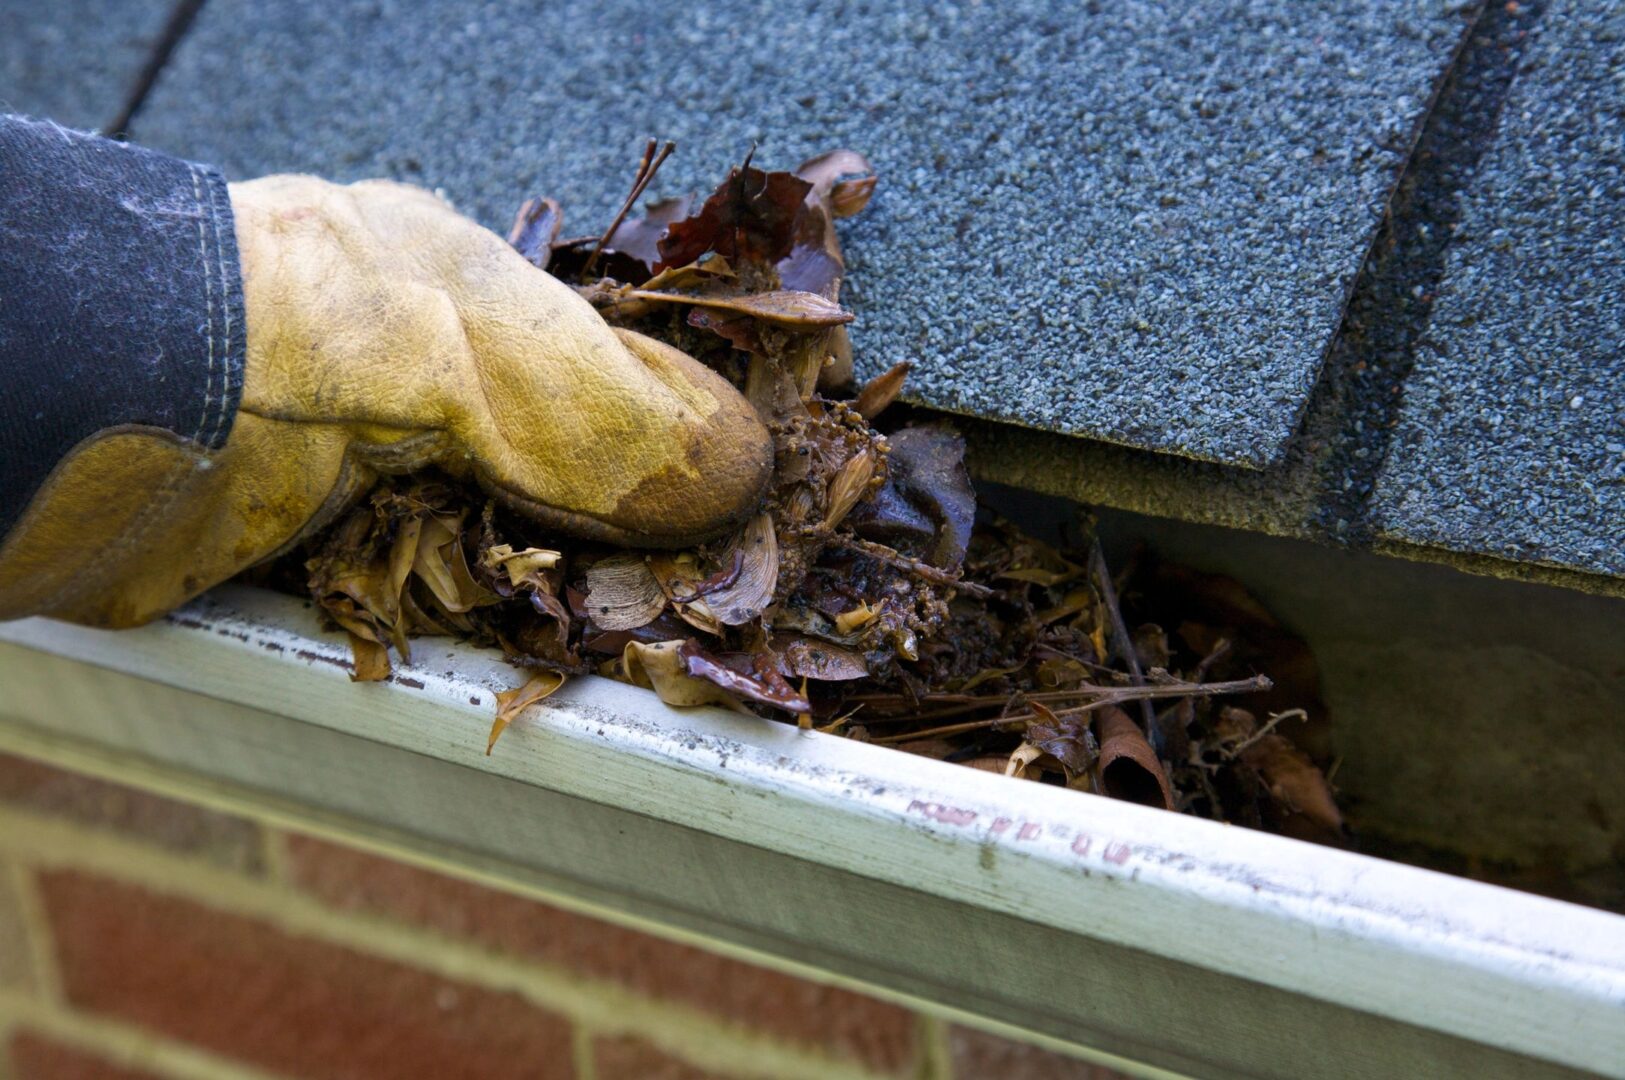 A person is cleaning leaves out of the gutter.